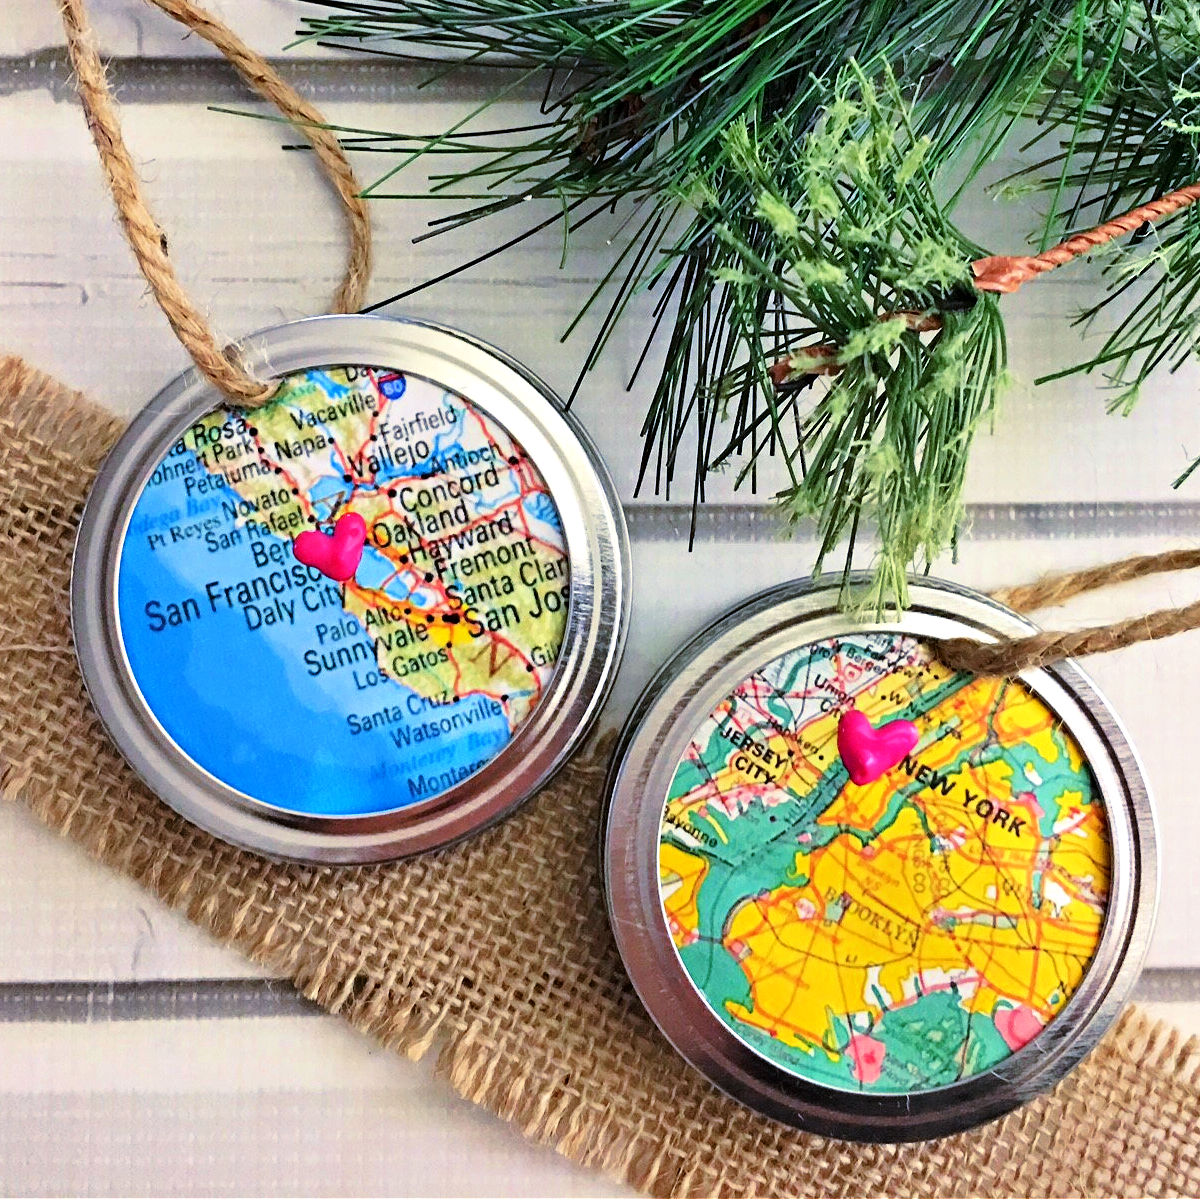 Two Mason Jar Ring Map ornaments with burlap and artificial Christmas tree branches on a vintage white wood table